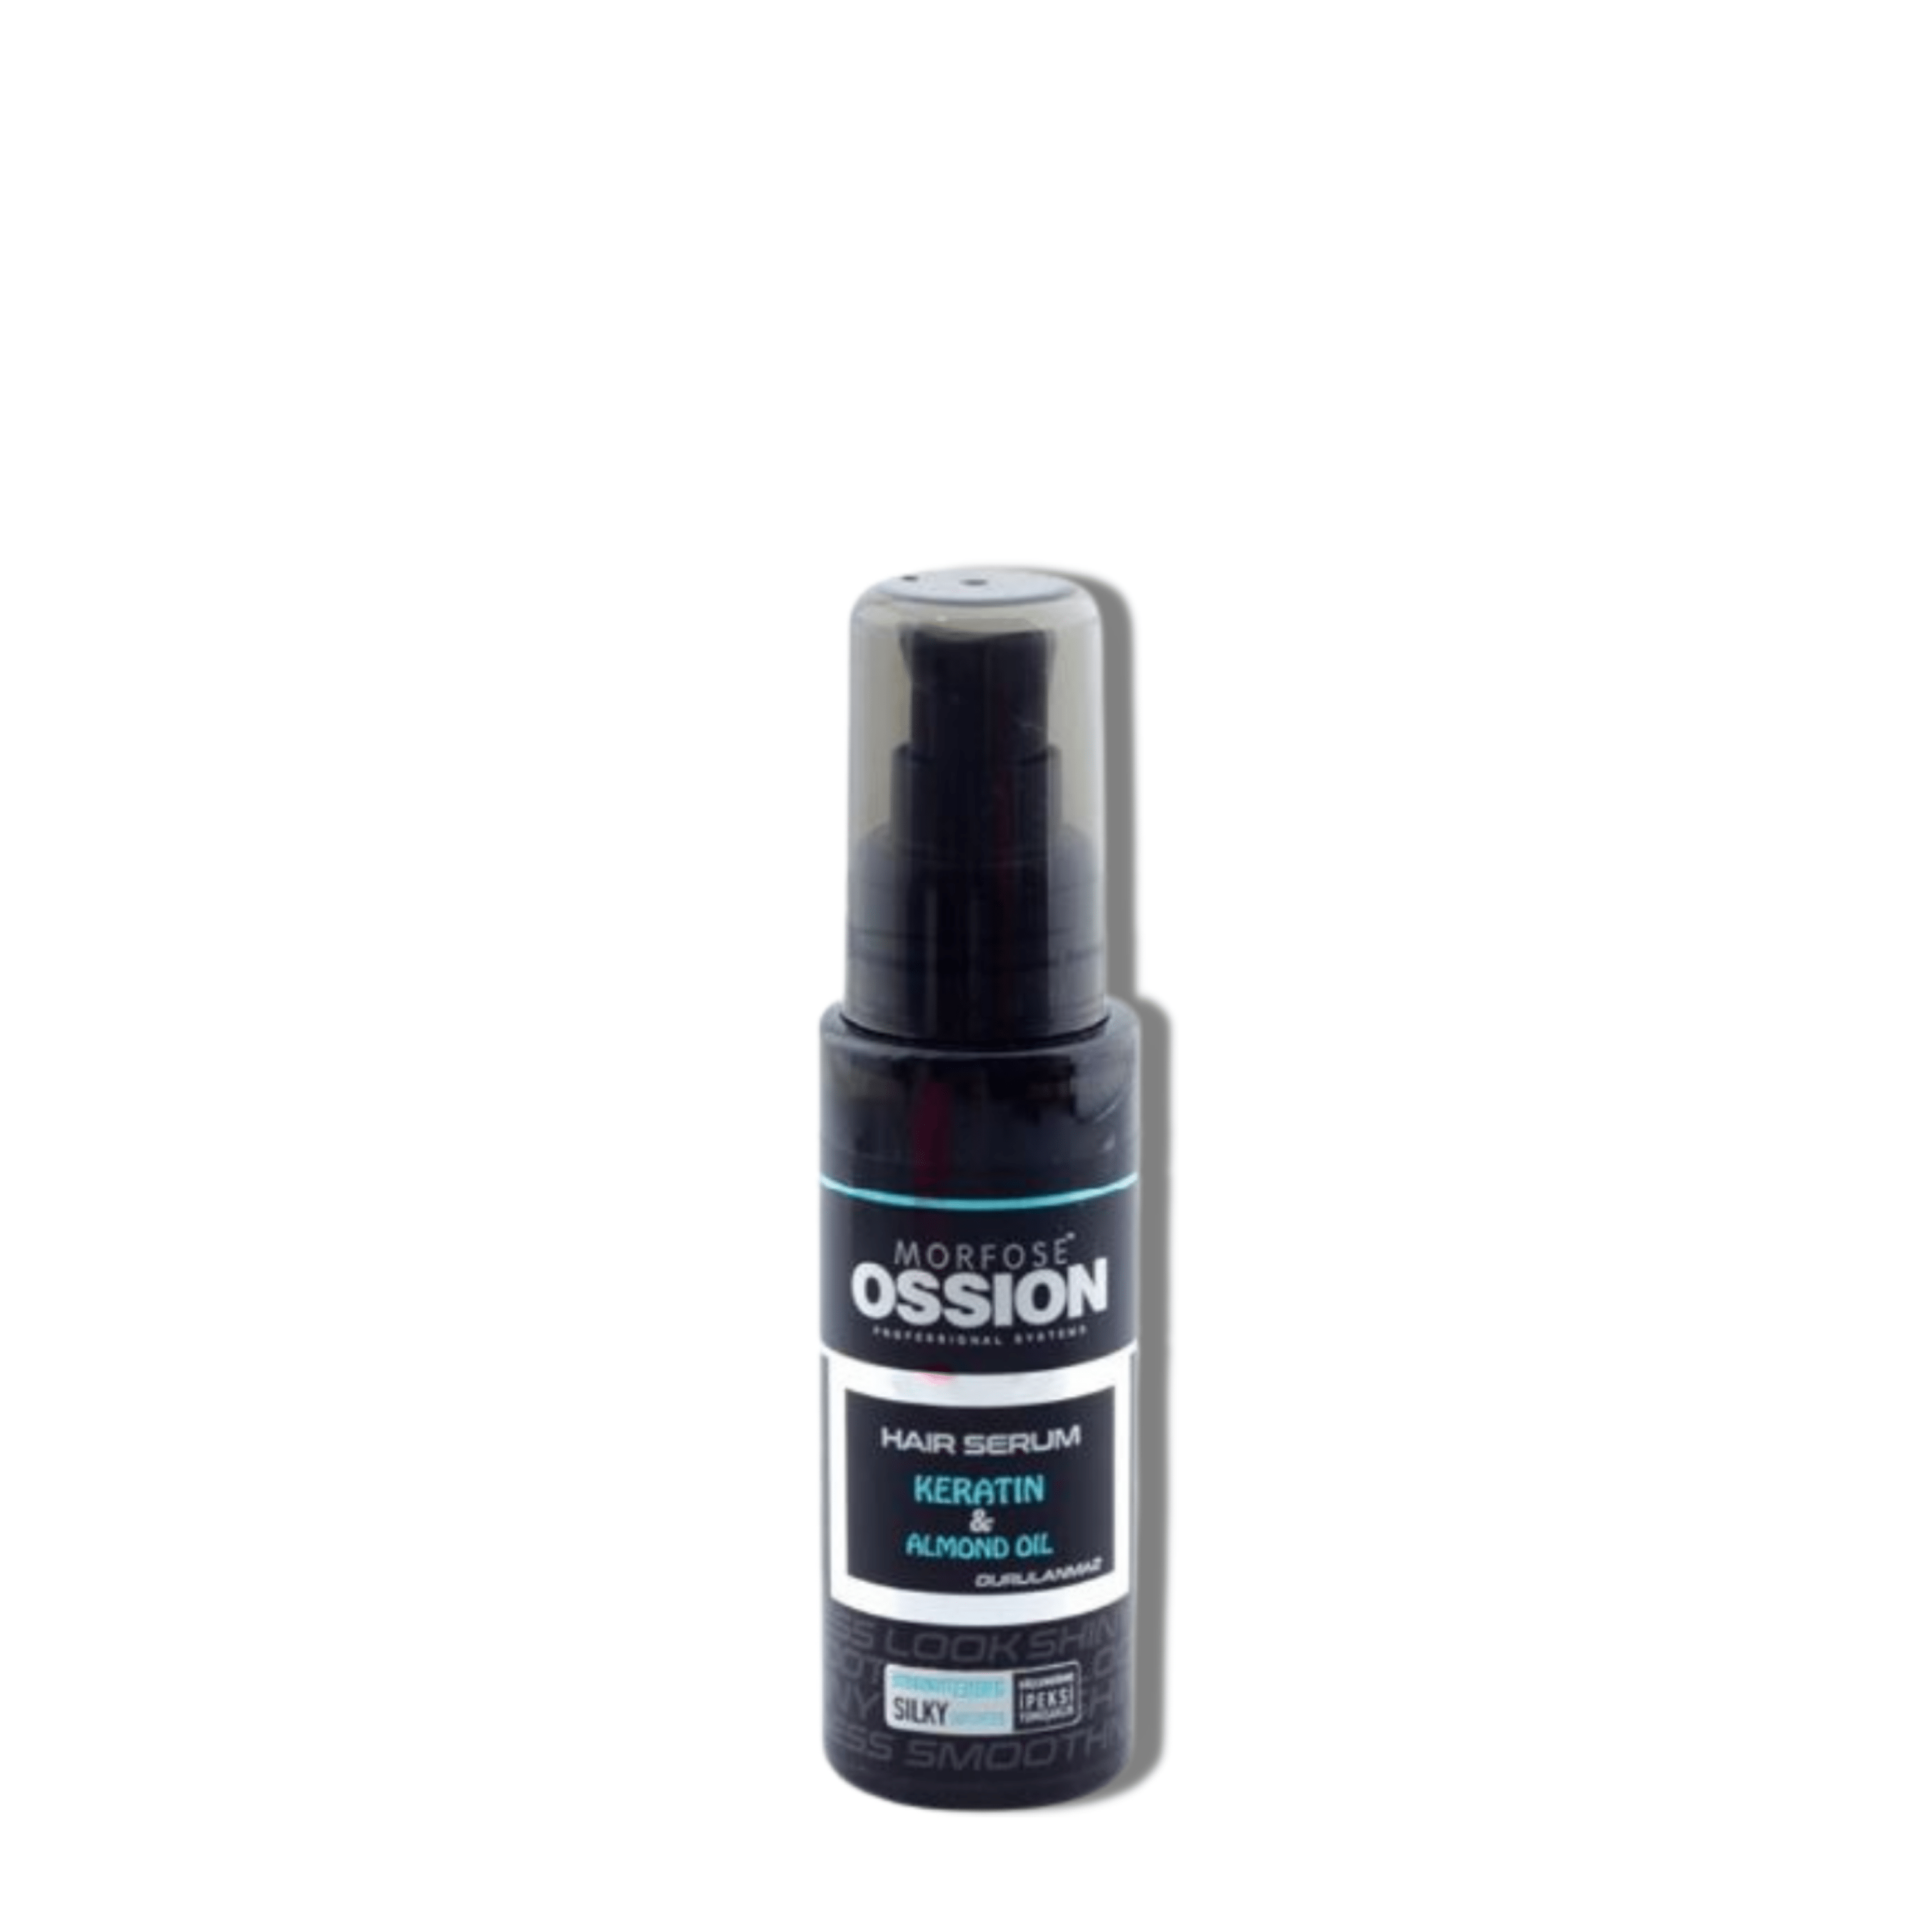 Morfose Ossion Keratin and Almond Hair Oil